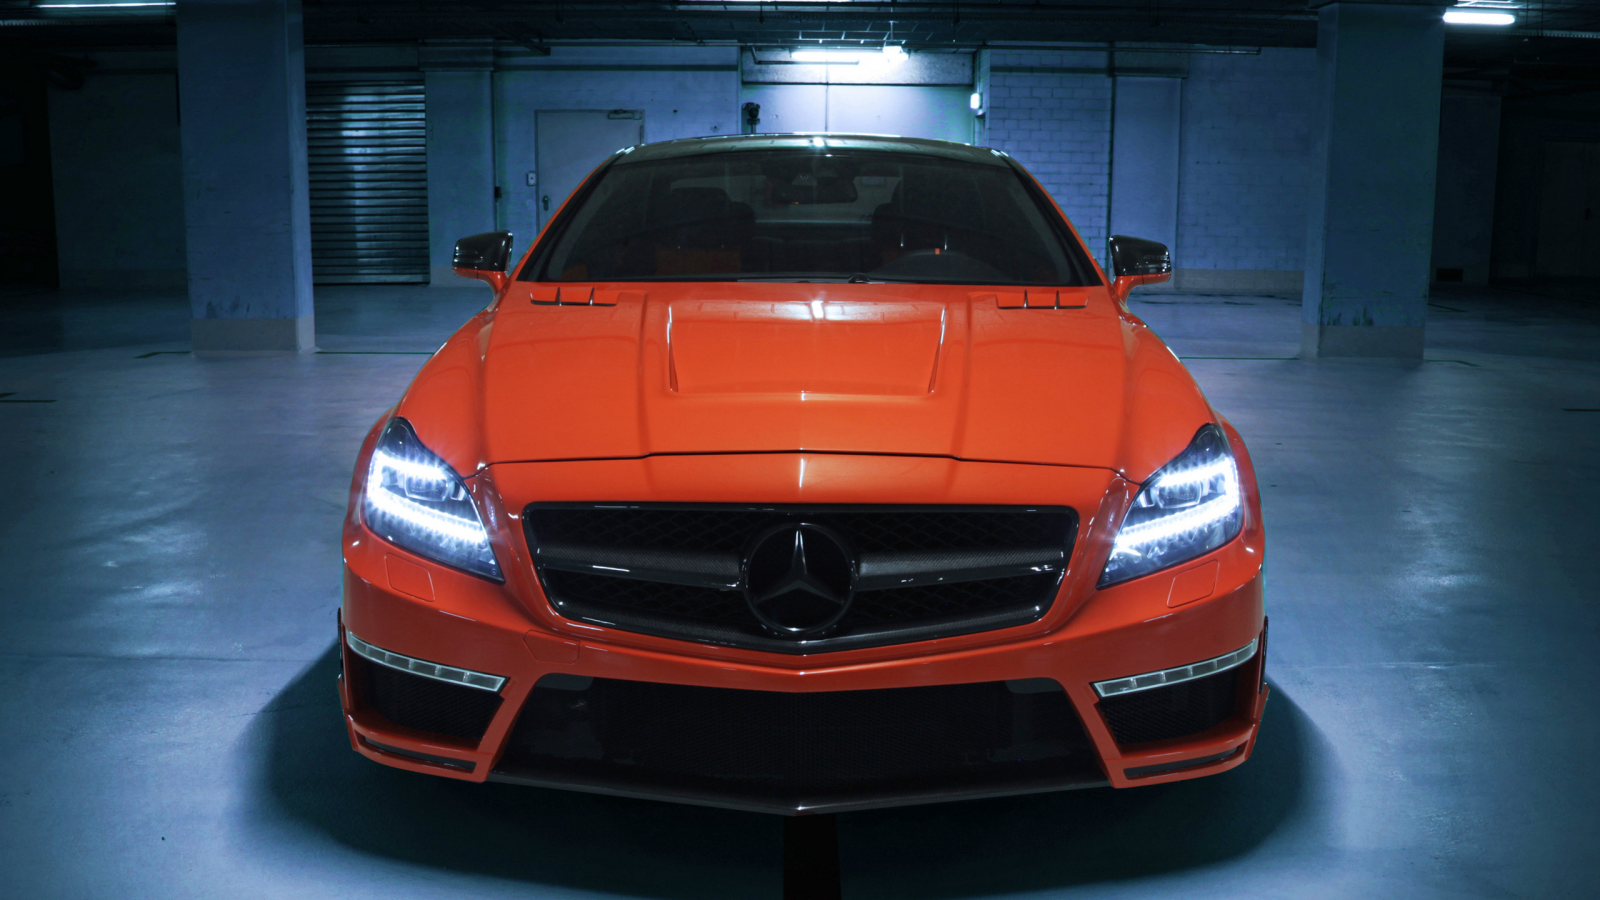 german special customs, amg, gsc, tuning, mercedes-benz, обои, orange, car, front, cls 63